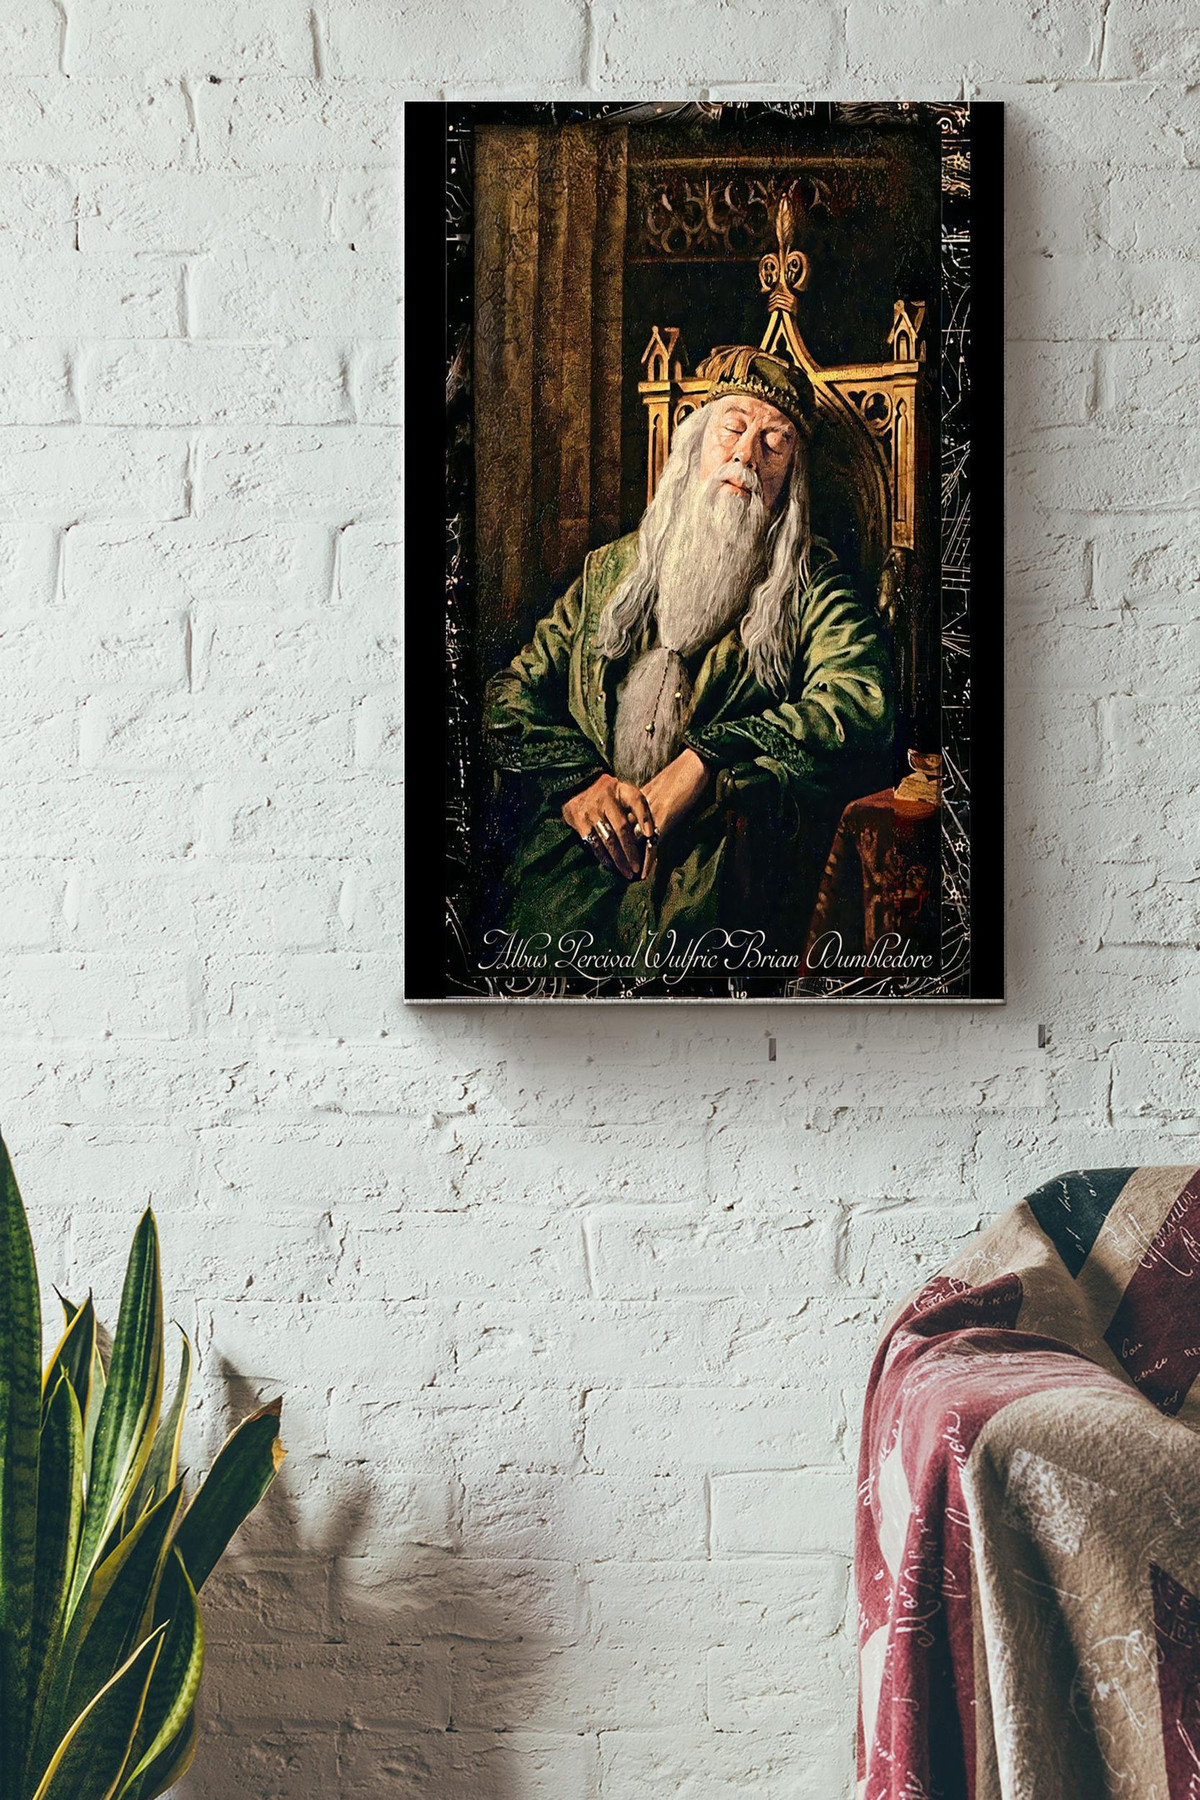 Albus Percival Wulfric Brian Dumbledore Sleeping Canvas Gift For Potter Fan, Dumbledore Fan, Novel Lover Canvas Gallery Painting Wrapped Canvas Framed Gift Idea Wrapped Canvas 8x10